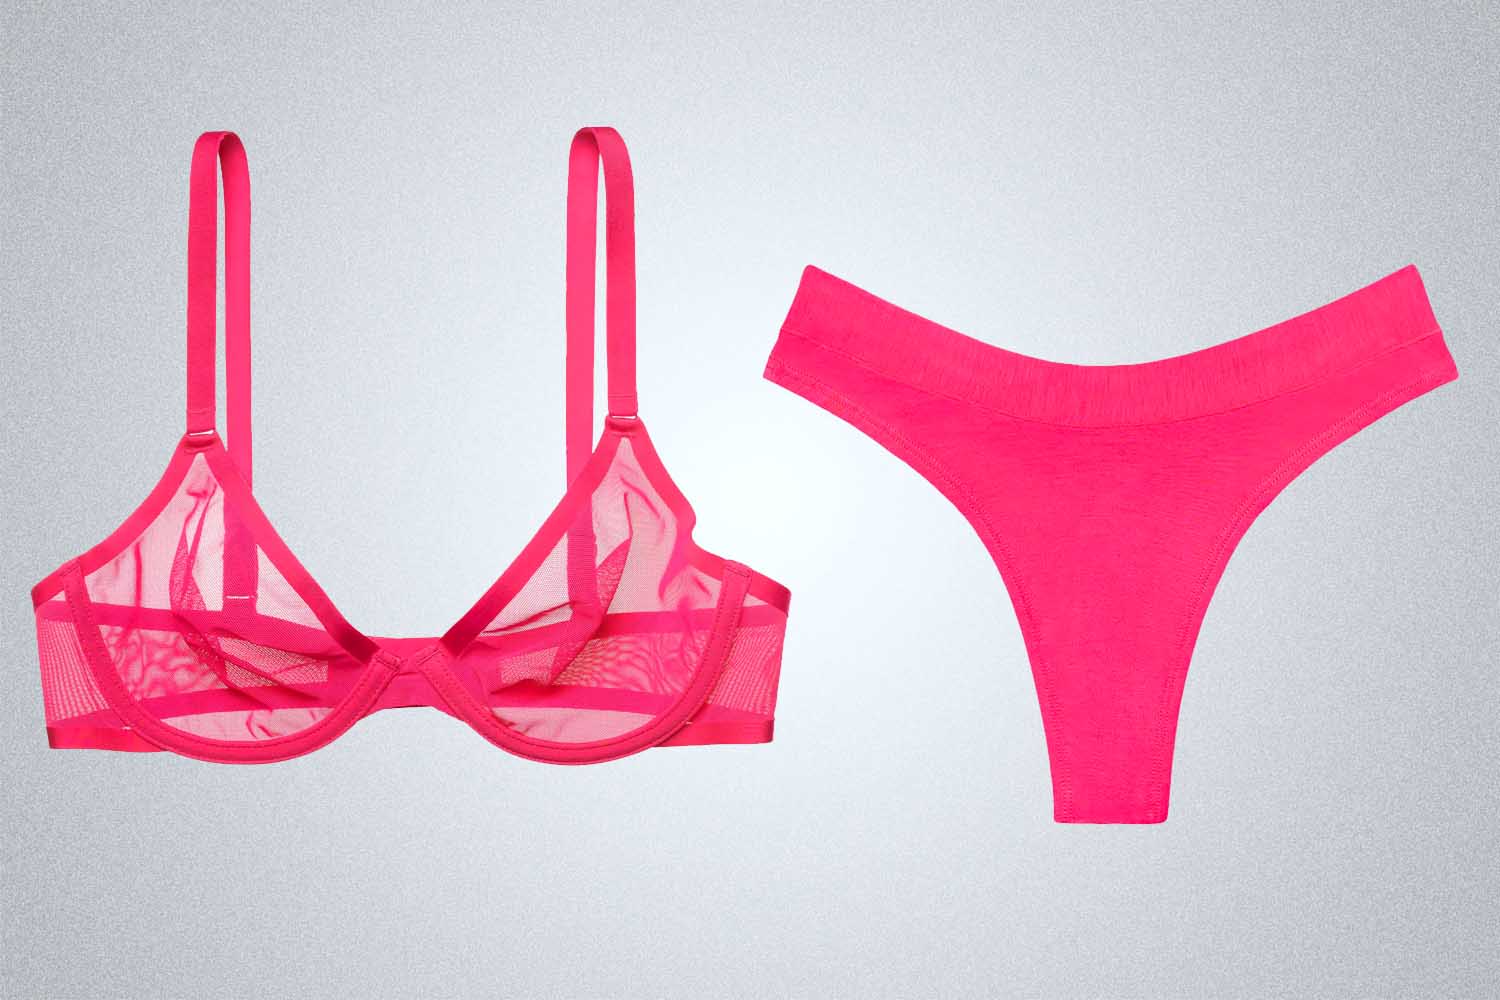 Lingerie buying guide: Everything you need to know about size, fit